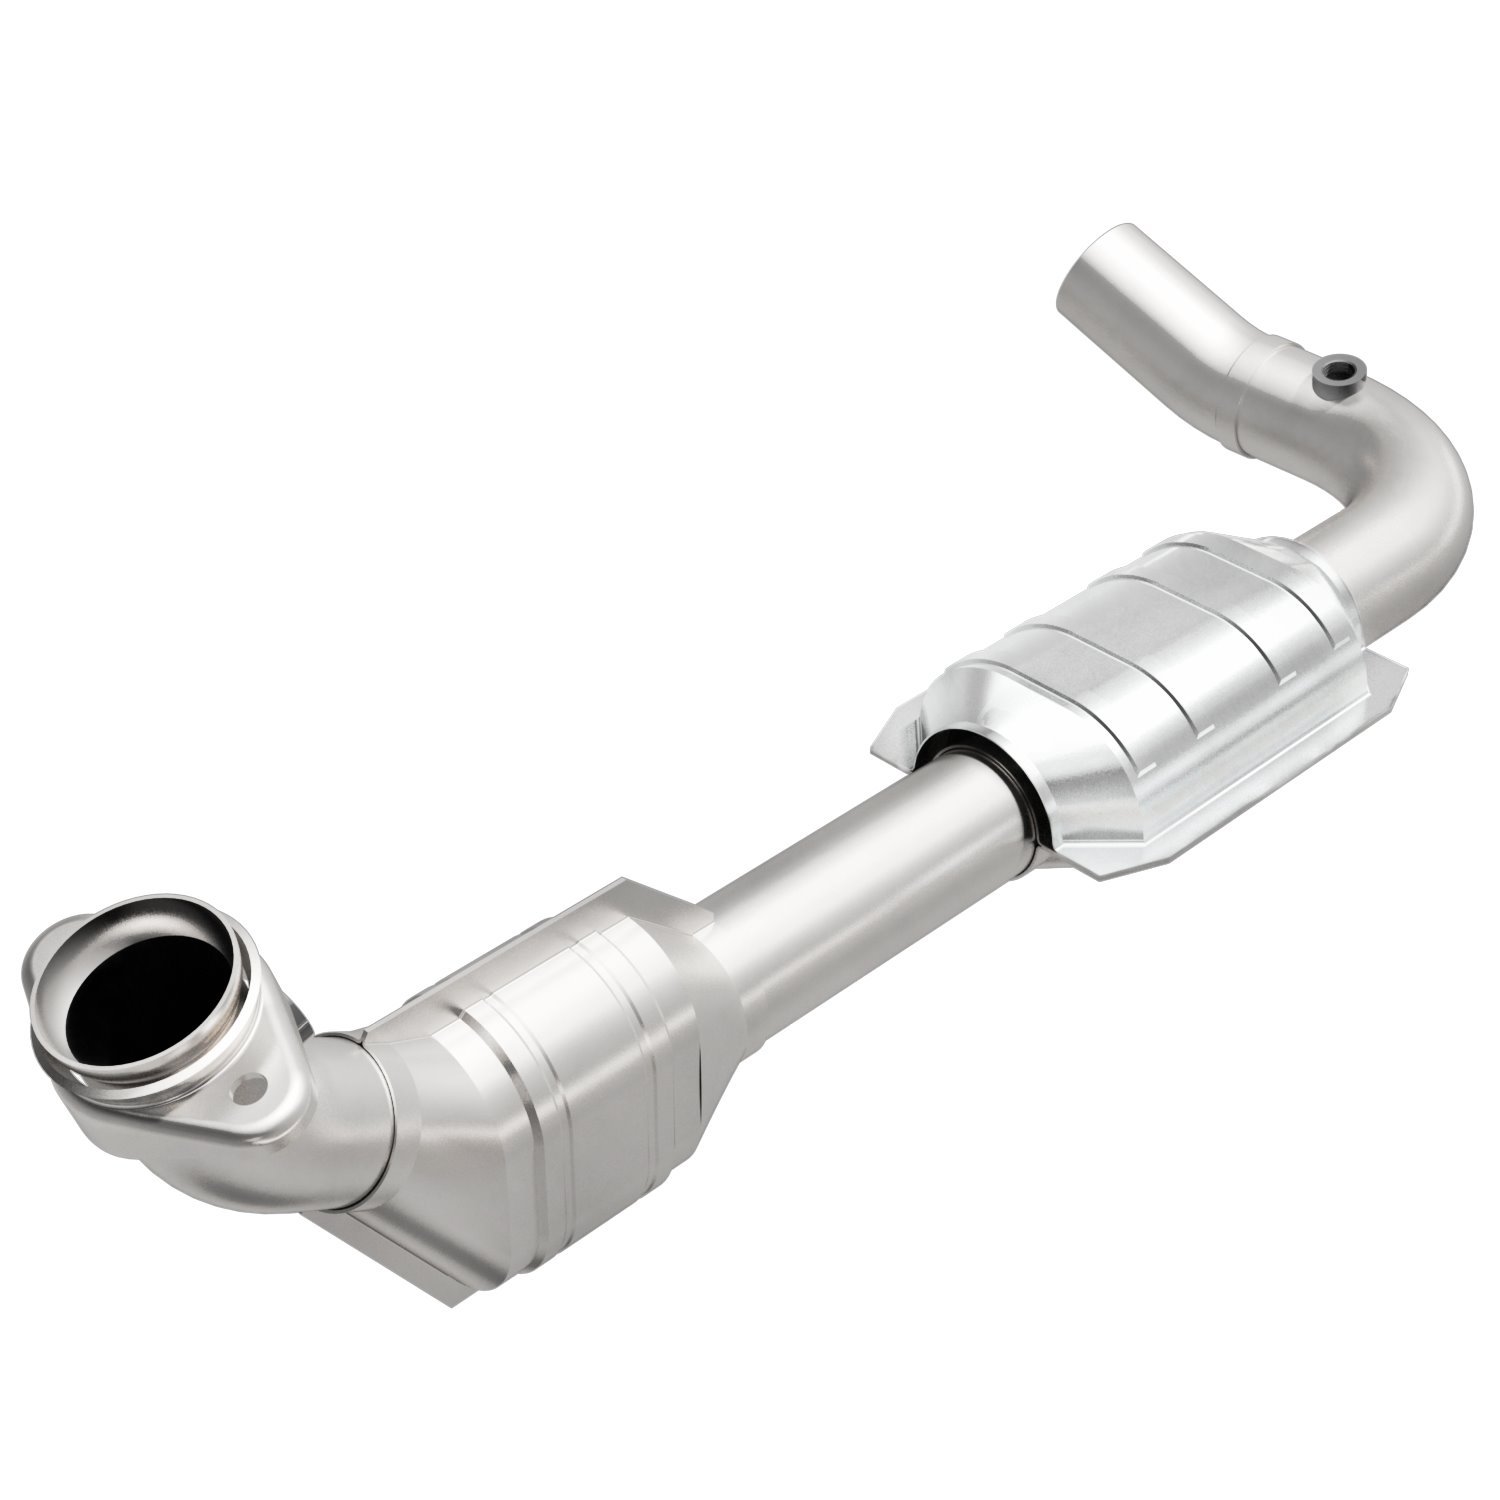 HM Grade Federal / EPA Compliant Direct-Fit Catalytic